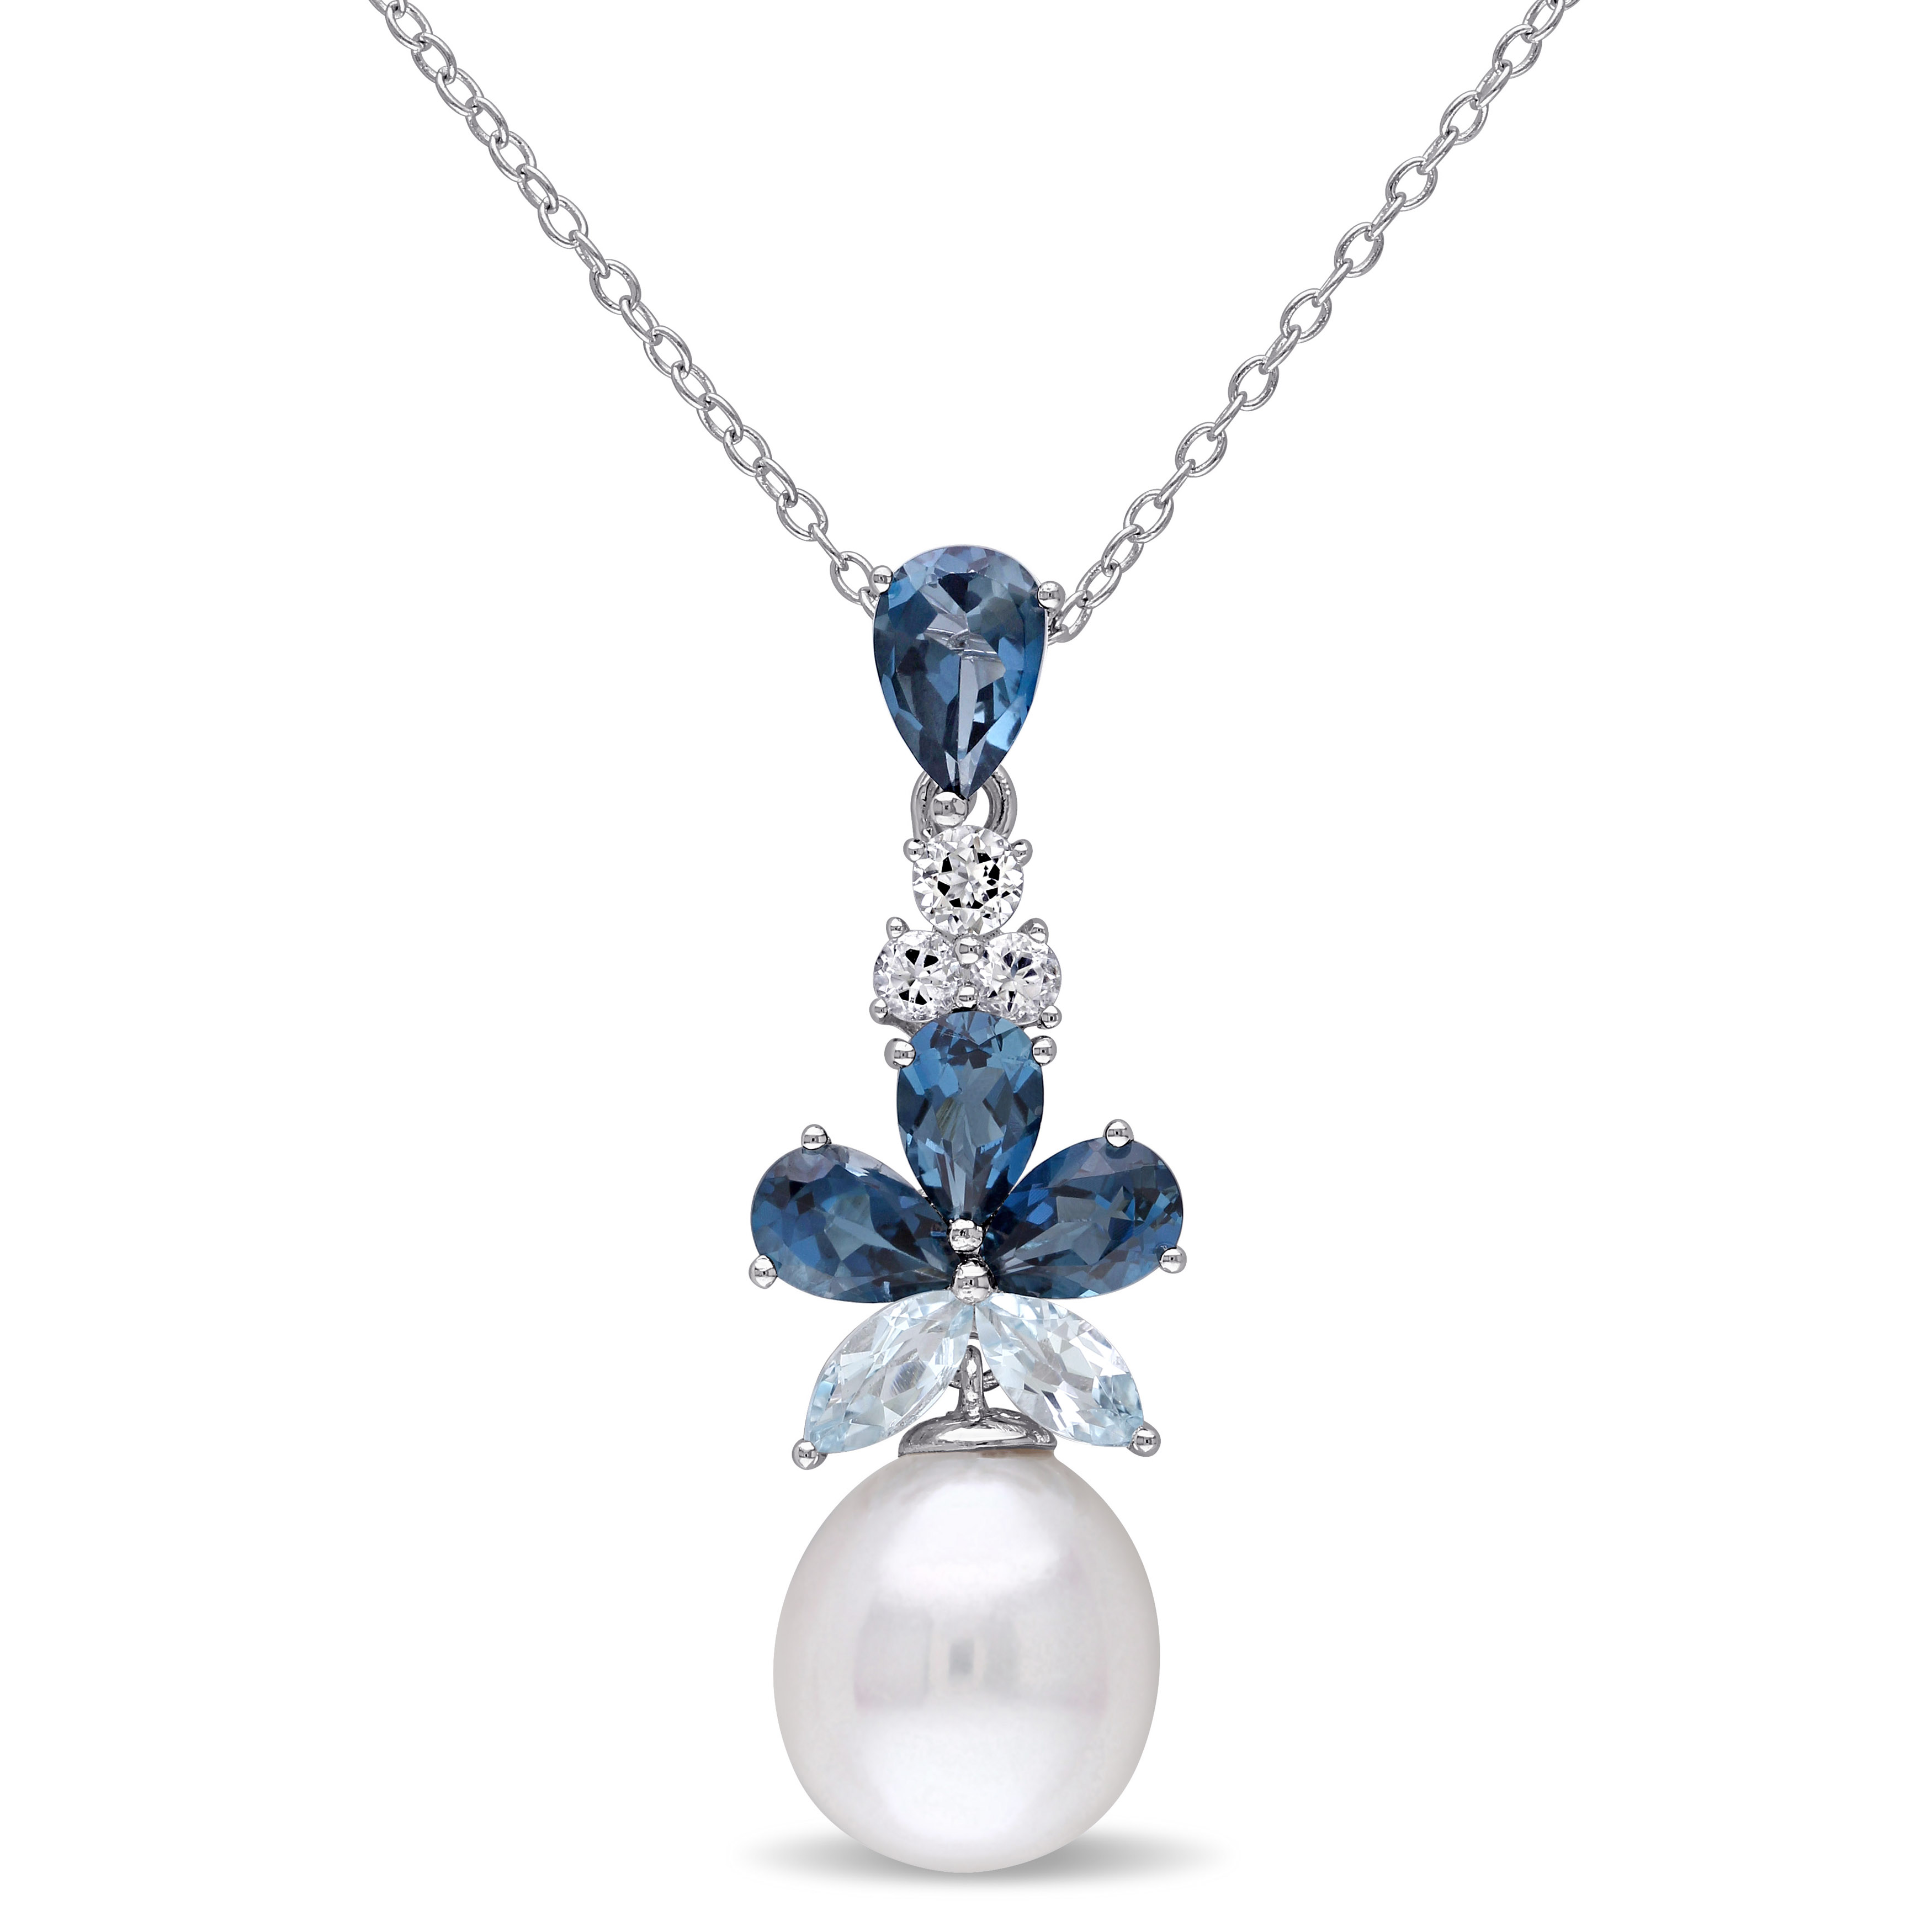 3 1/4 CT TGW London, Sky Blue and White Topaz and 9.5 - 10 MM White Cultured Freshwater Pearl Drop Pendant with Chain in Sterling Silver